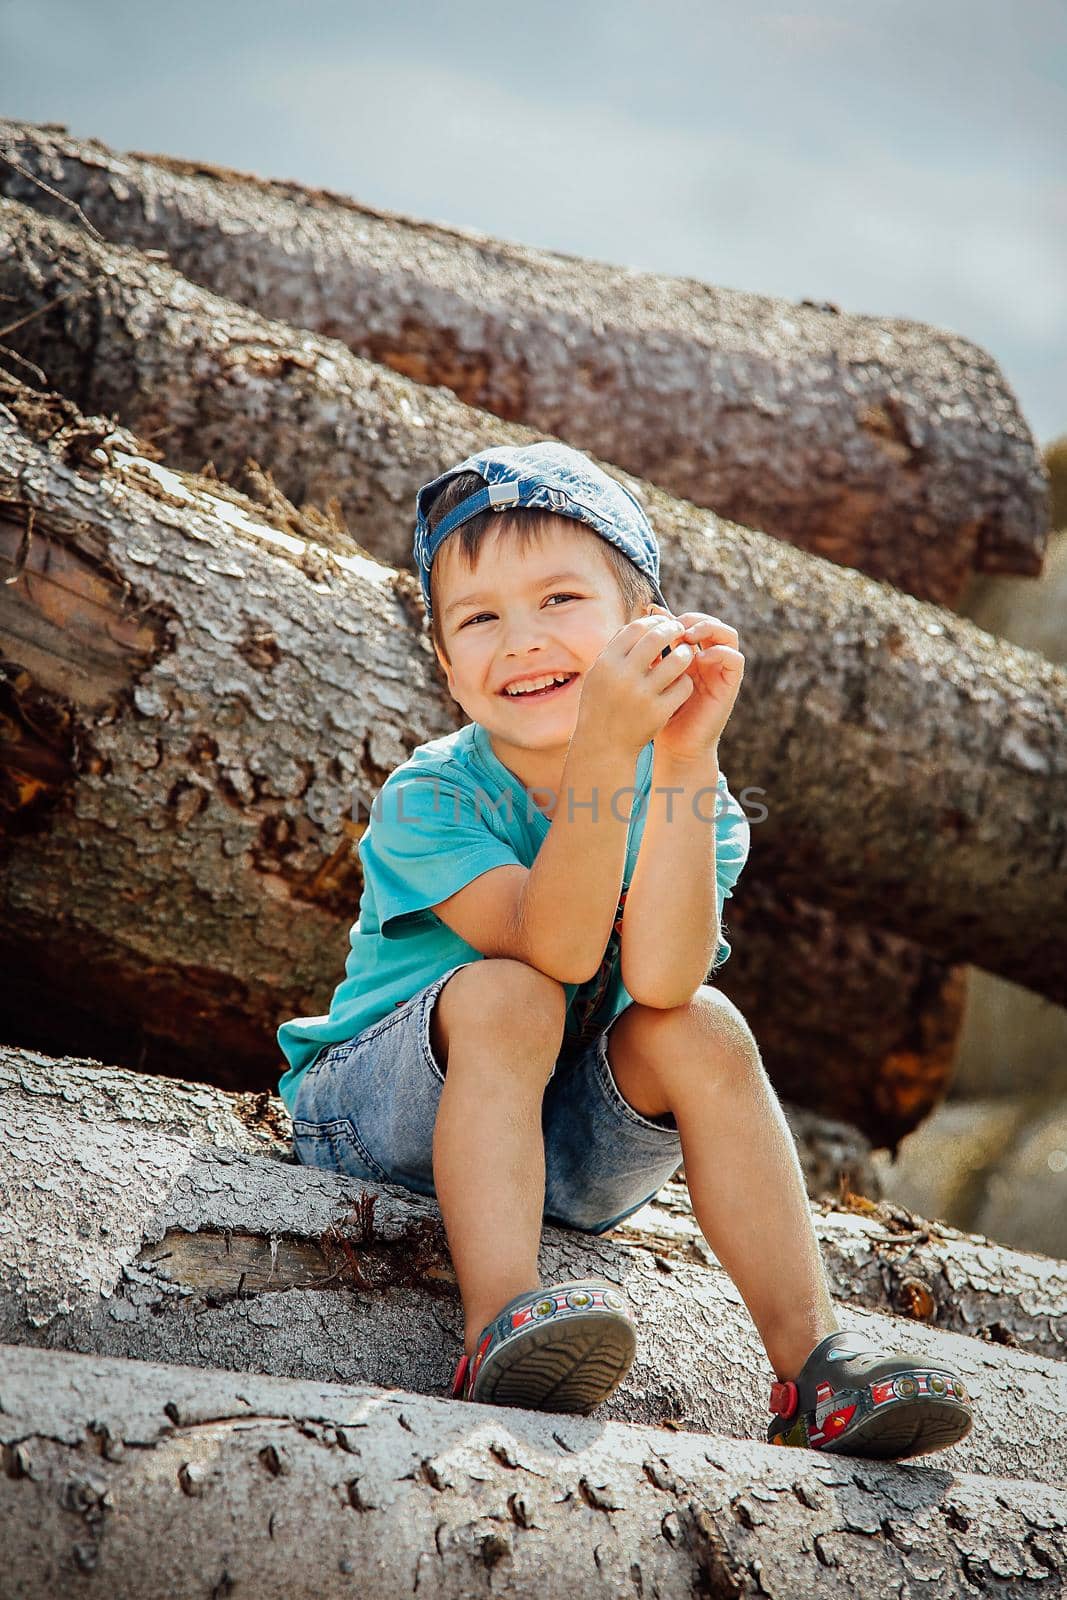 A small child in a blue baseball cap and short denim shorts sits on a log and laughs merrily